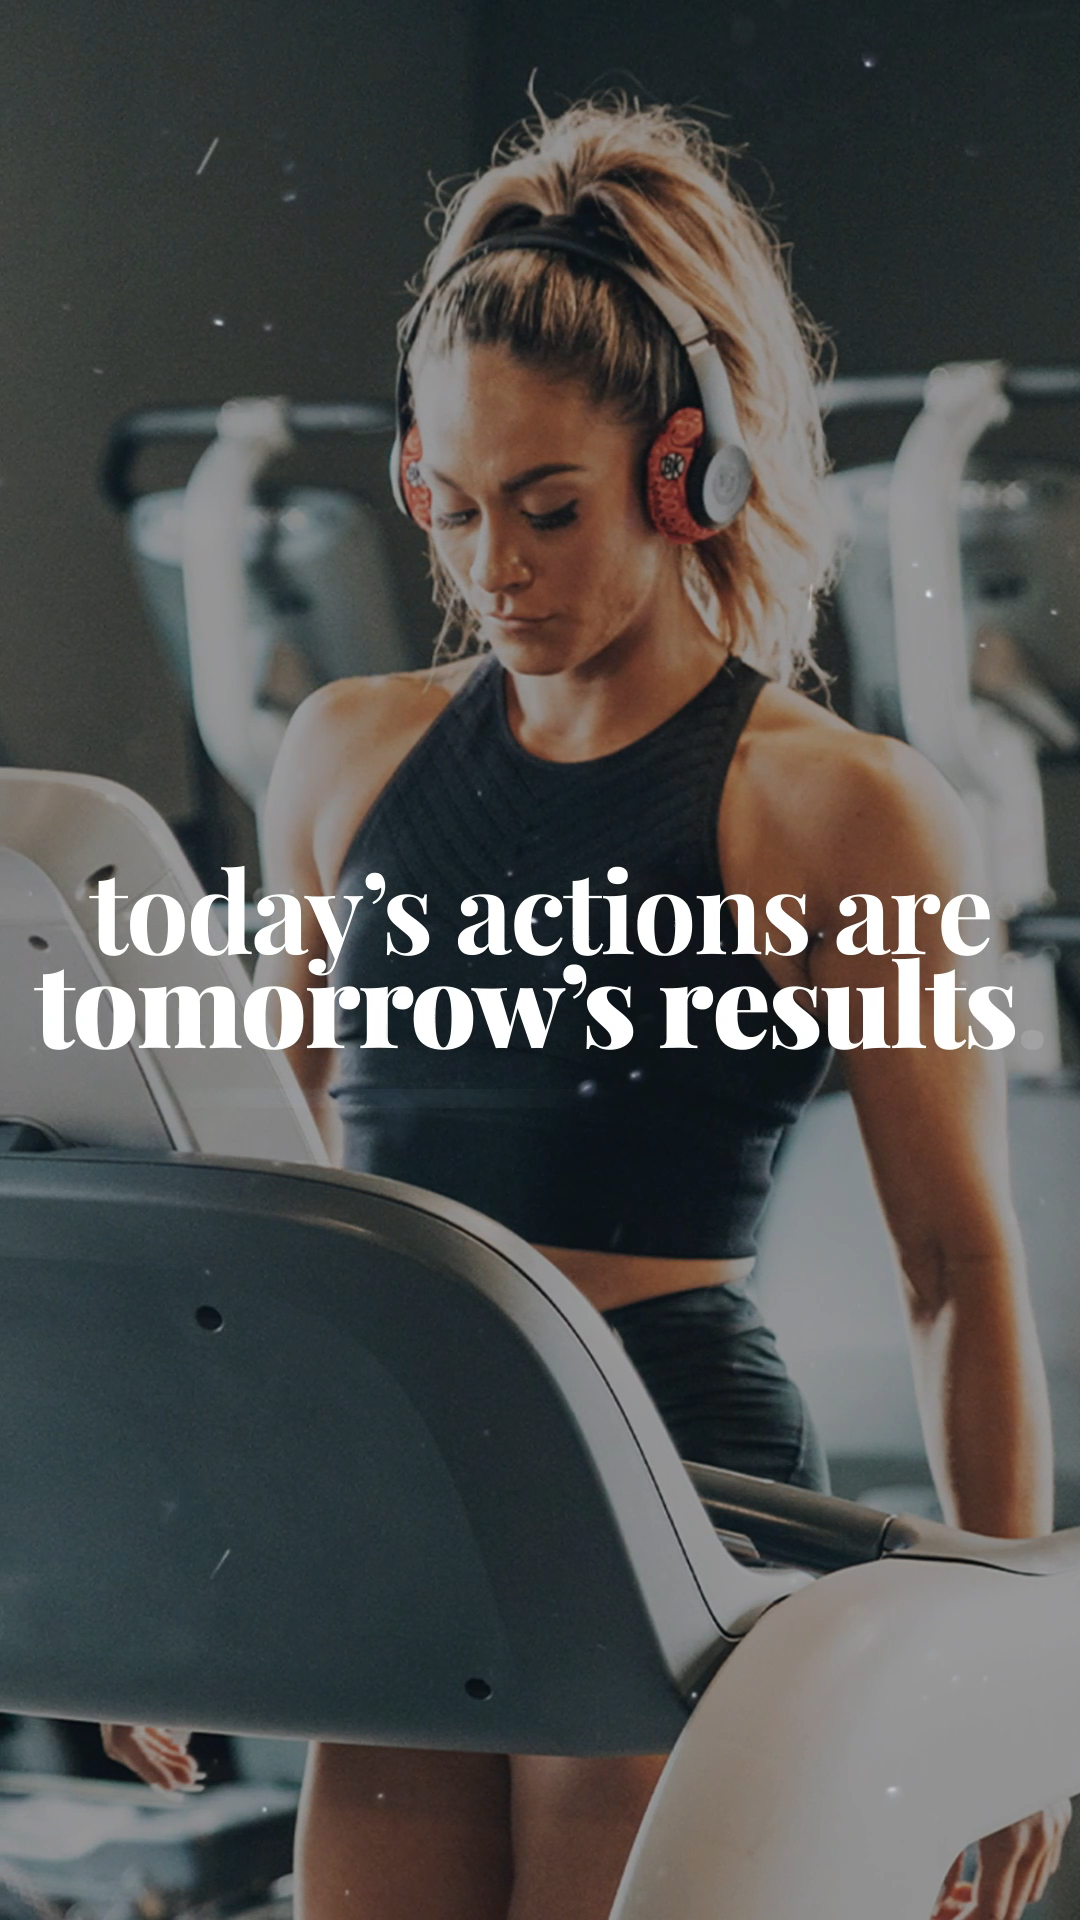 Today's actions... Tomorrow's results. - Today's actions... Tomorrow's results. -   19 fitness Quotes background ideas